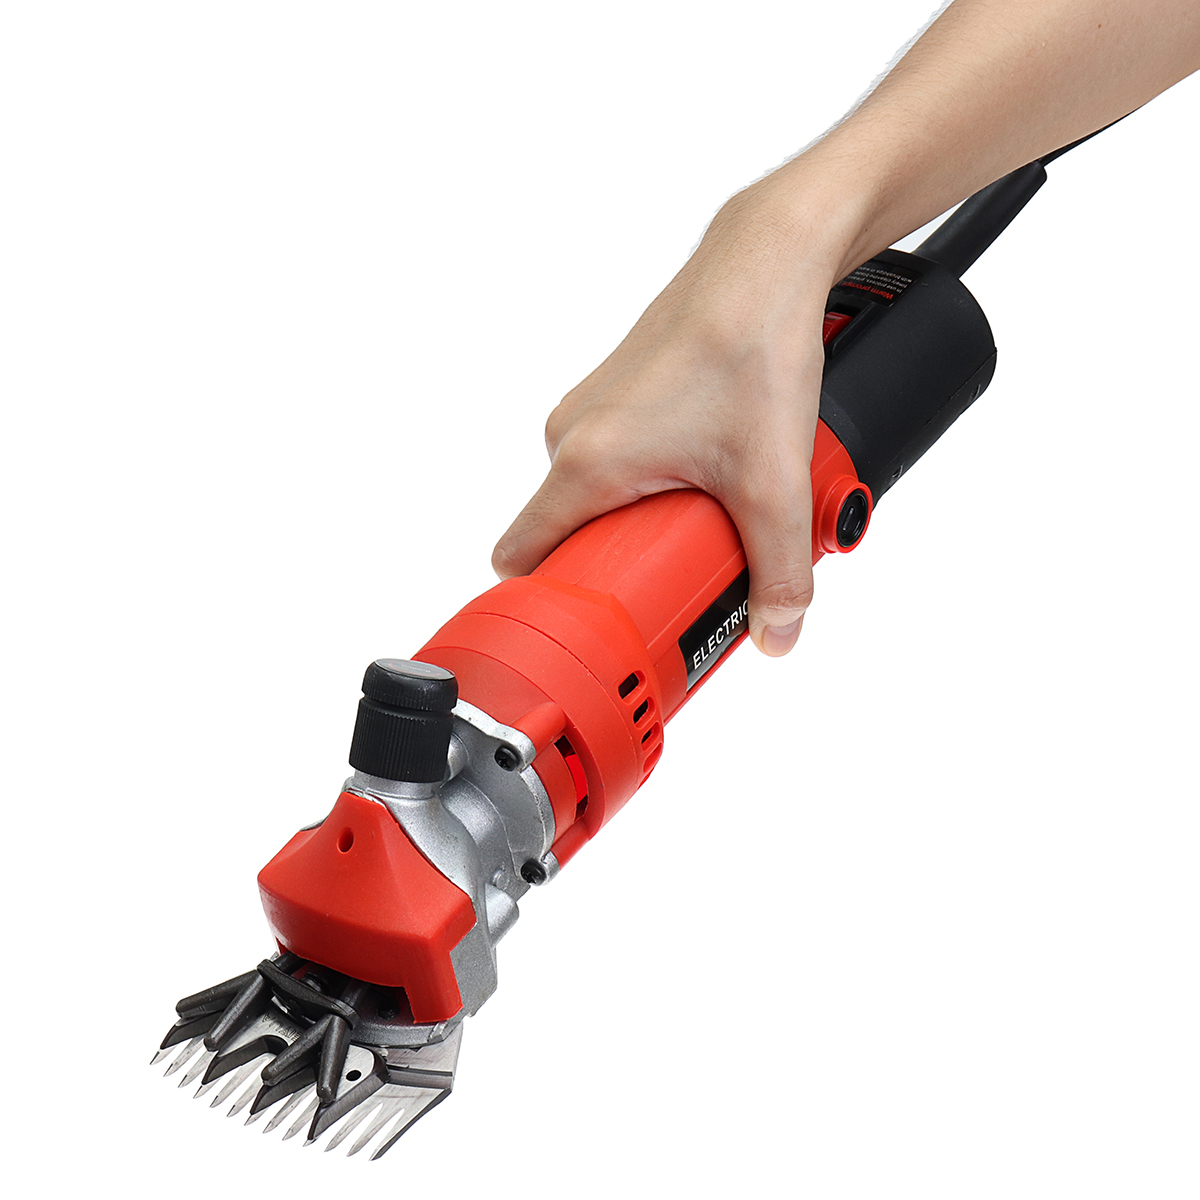 600W-220V-Electric-Sheep-Shearing-Machine-Goat-Hair-Trimmer-Clippers-Power-Tools-1347454-6